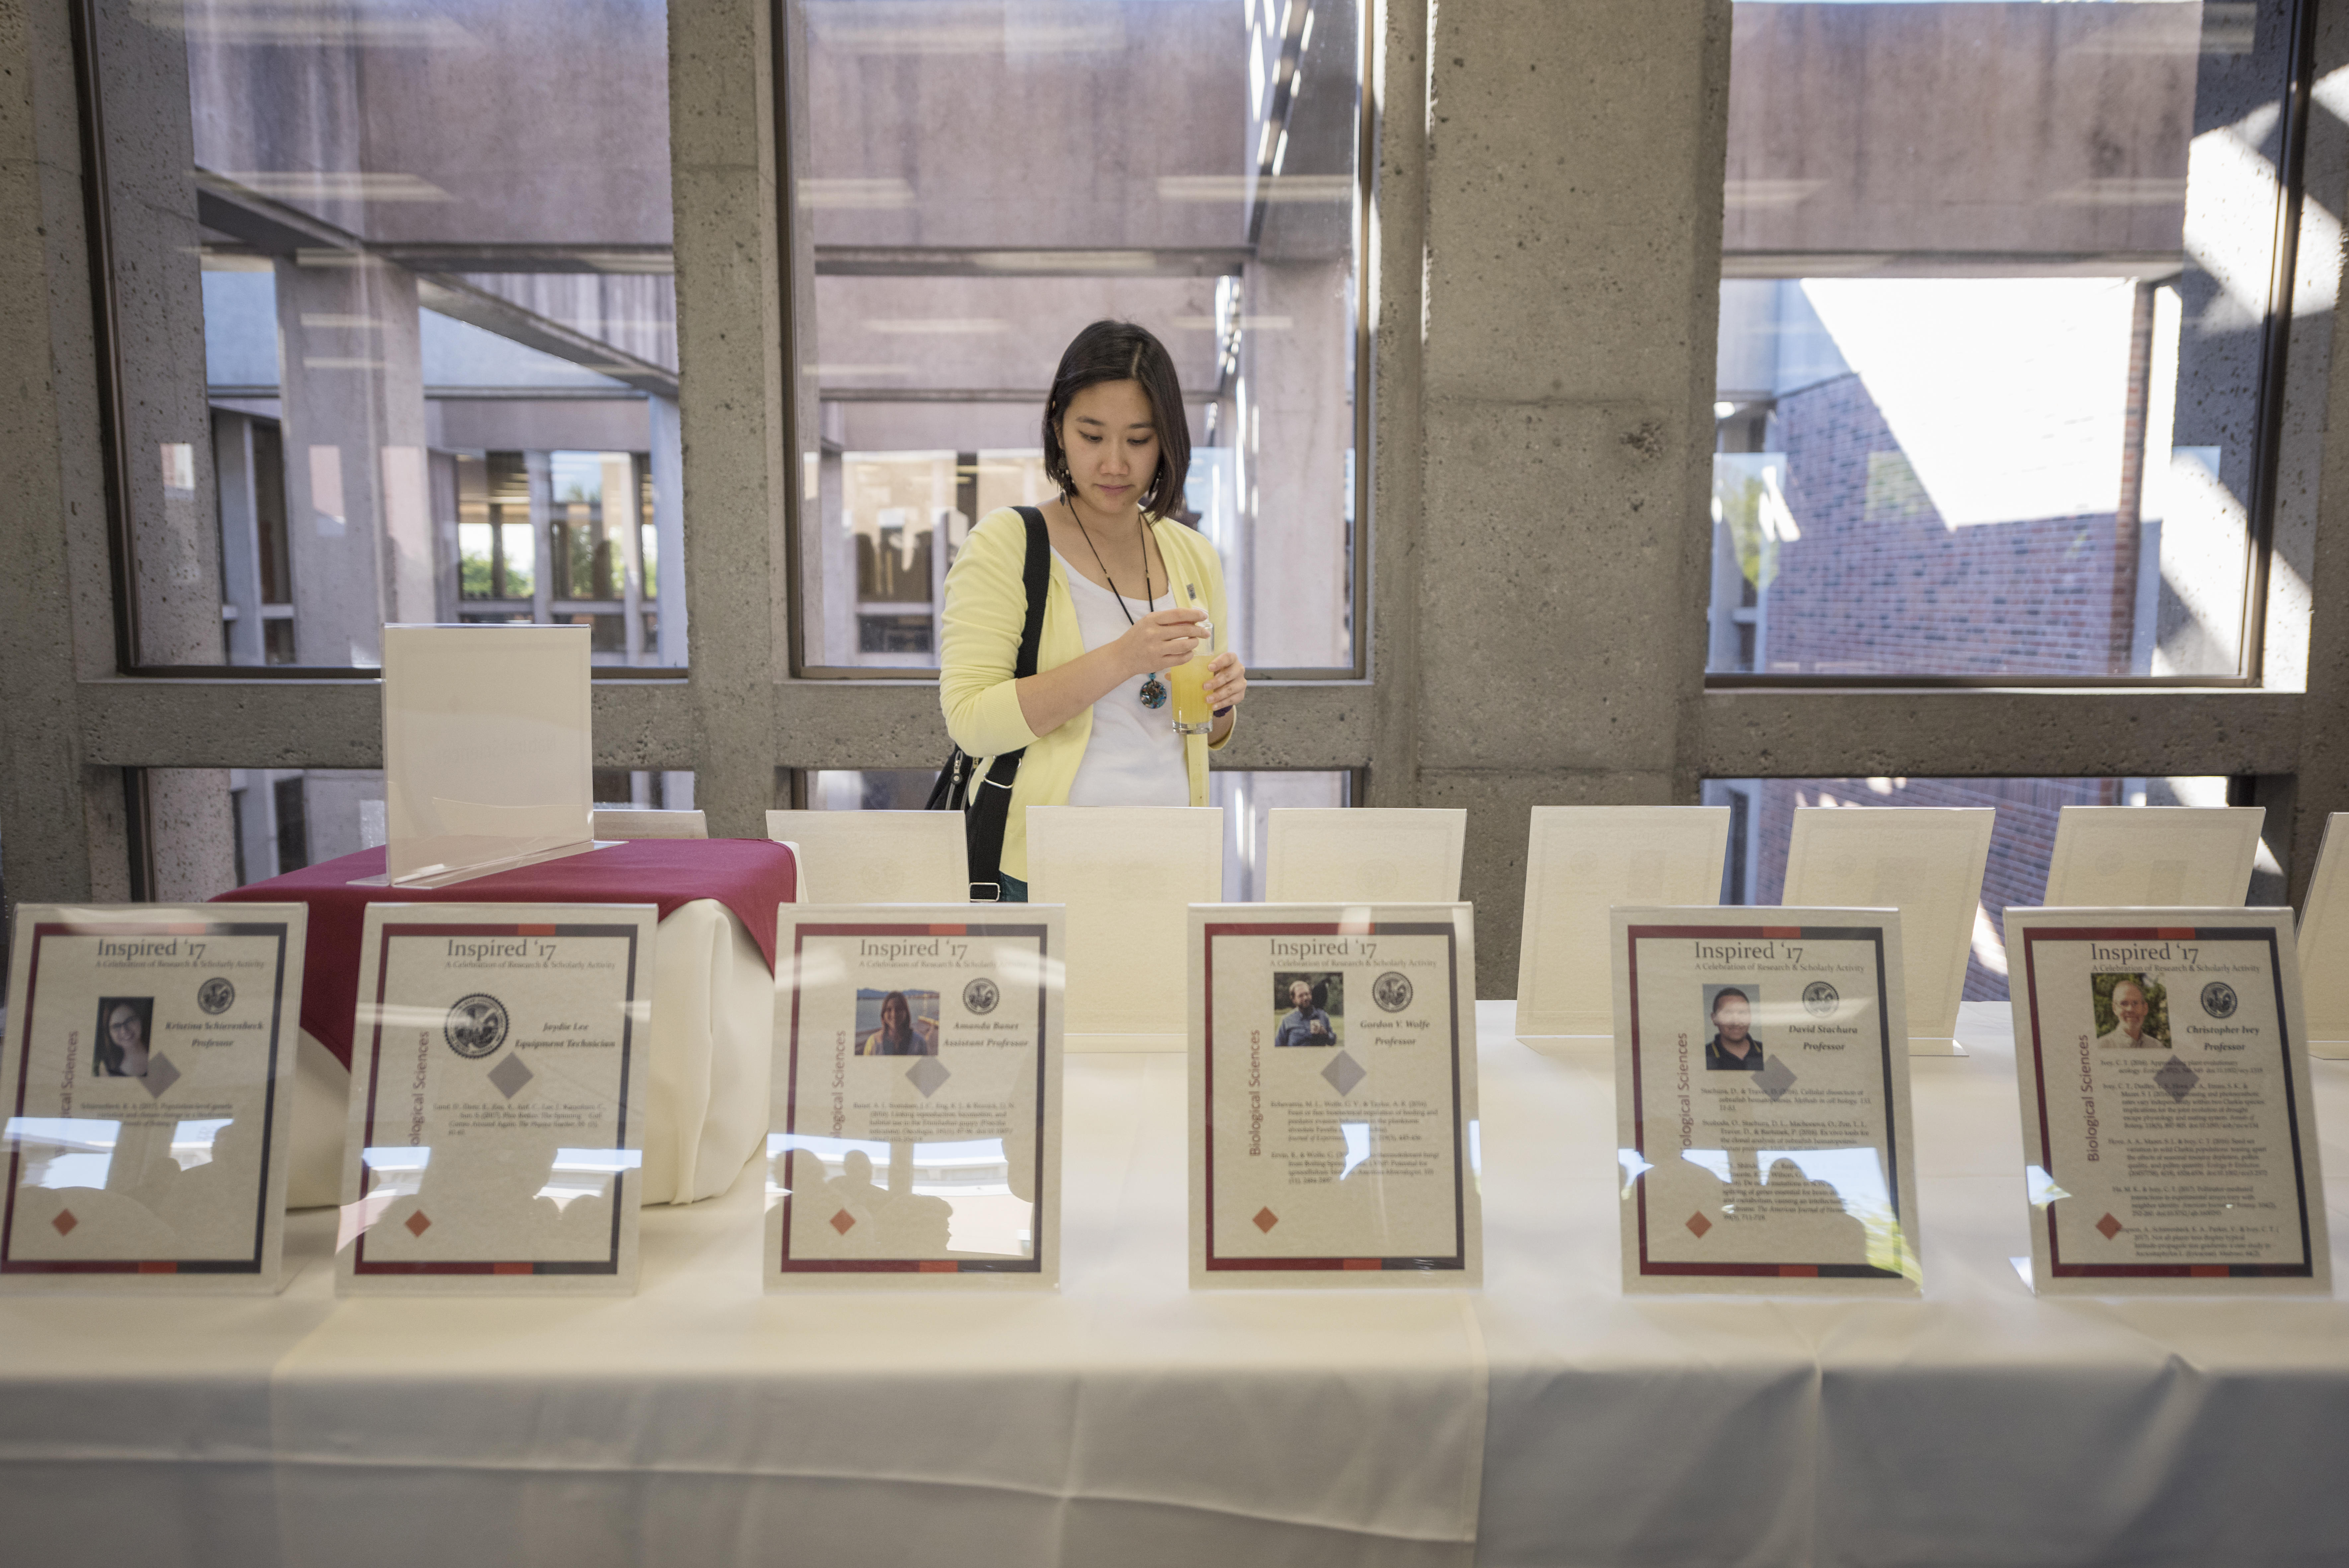 Department of Chemistry and Biochemistry Professor Monica So looks at a display of faculty publications during Inspired '17, the University's inaugural celebration of publication achievements of faculty, staff, and personnel.